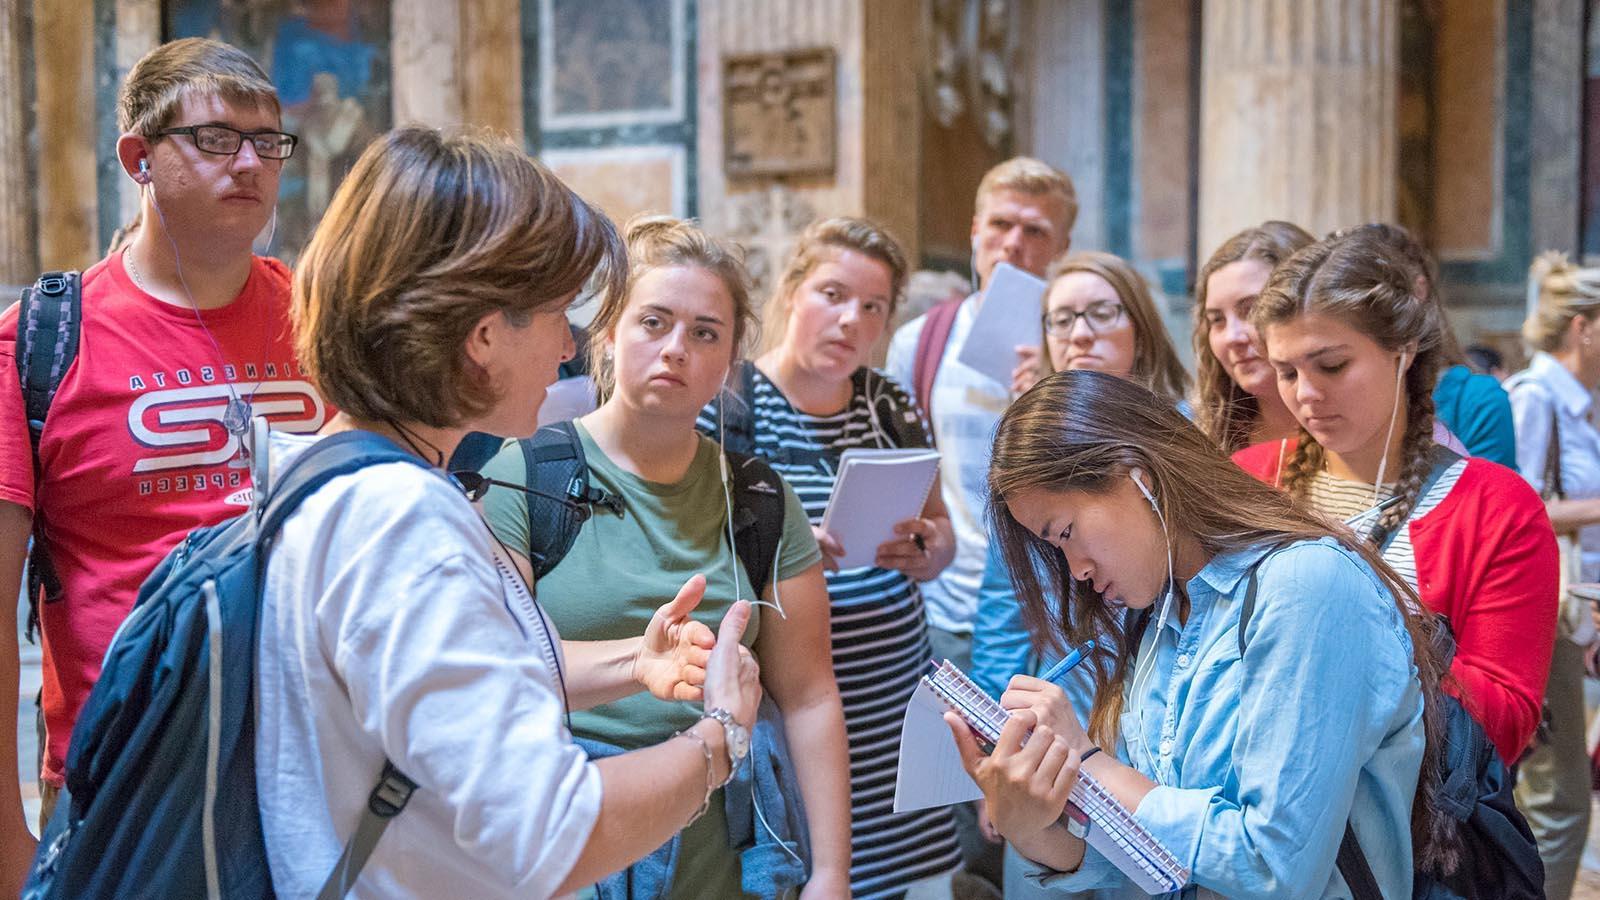 Study abroad students in the Pantheon in Rome, Italy, taking notes while listening to lecture by a professor